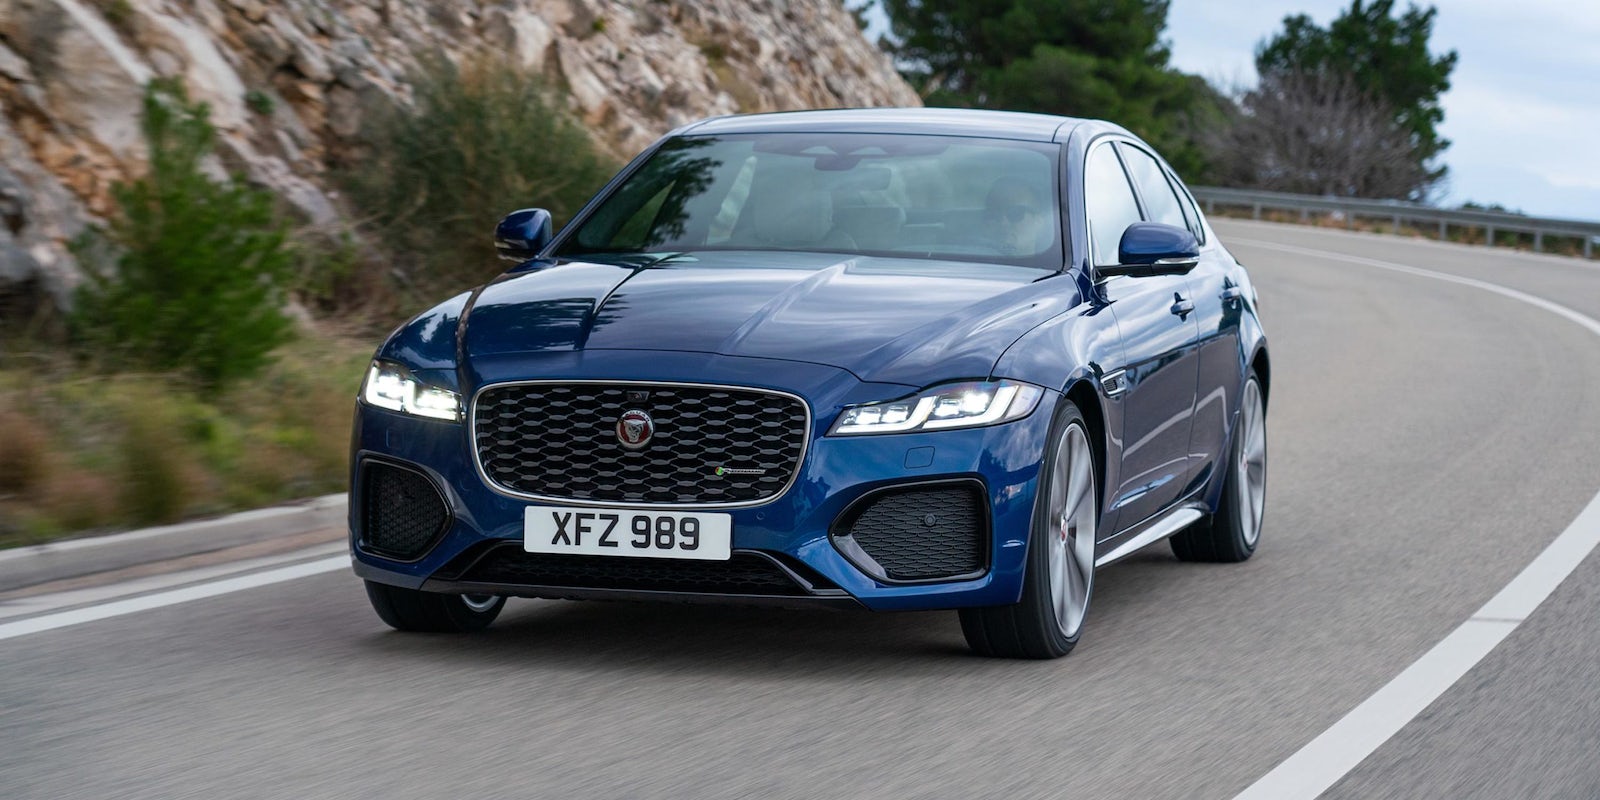 Jaguar XF and XF Sportbrake revealed: price, specs and release date